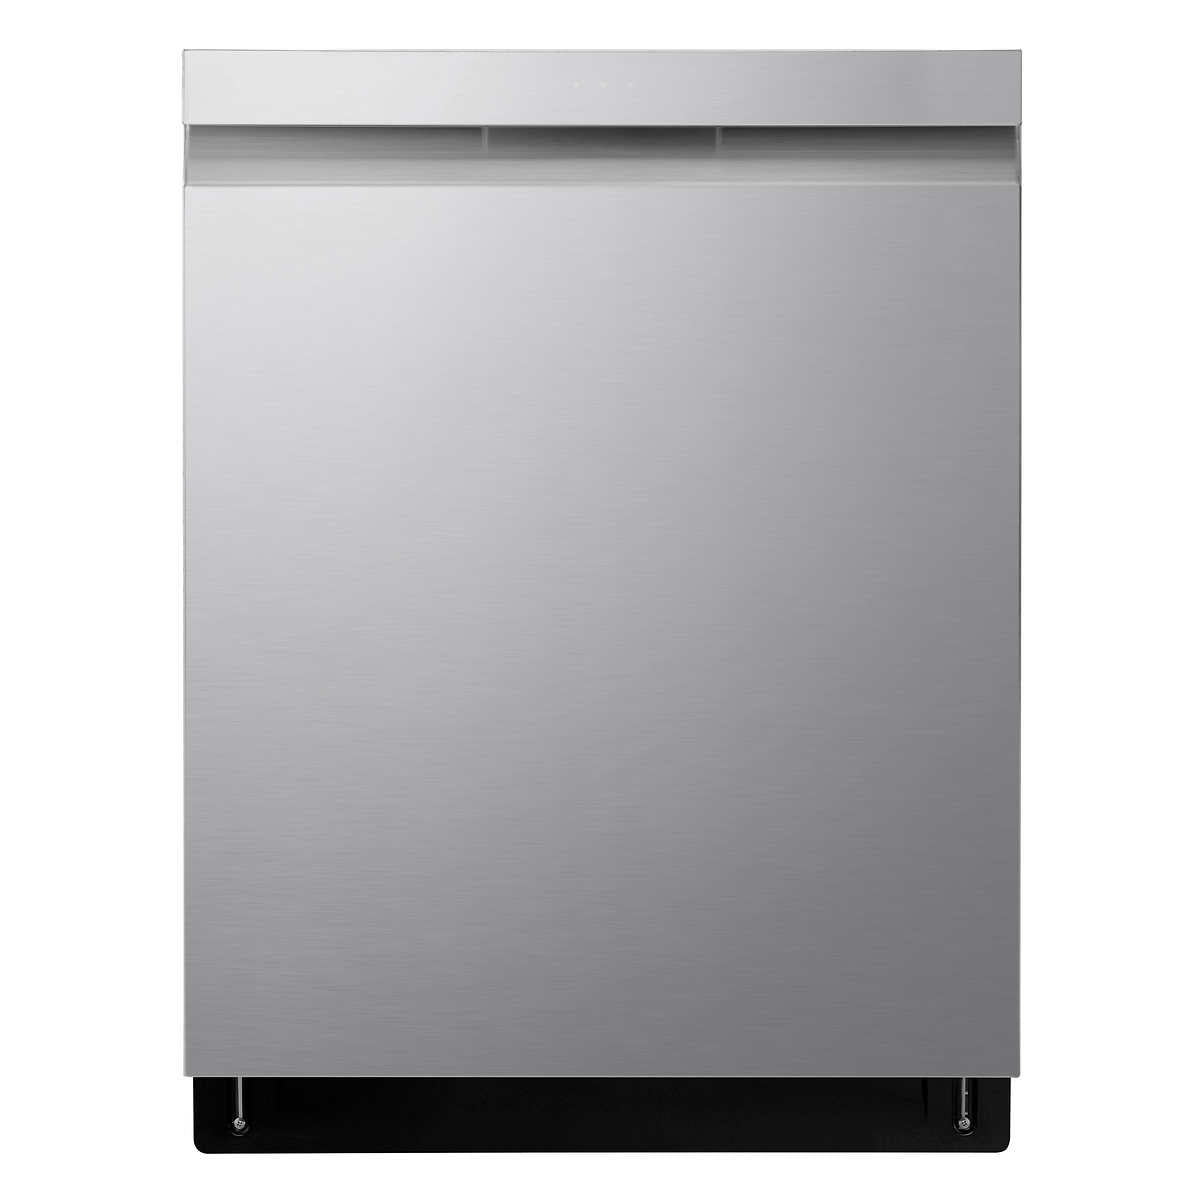 LG 24 in. Smudge-Resistant Stainless Steel Built-In DISHWASHER, returned item like new